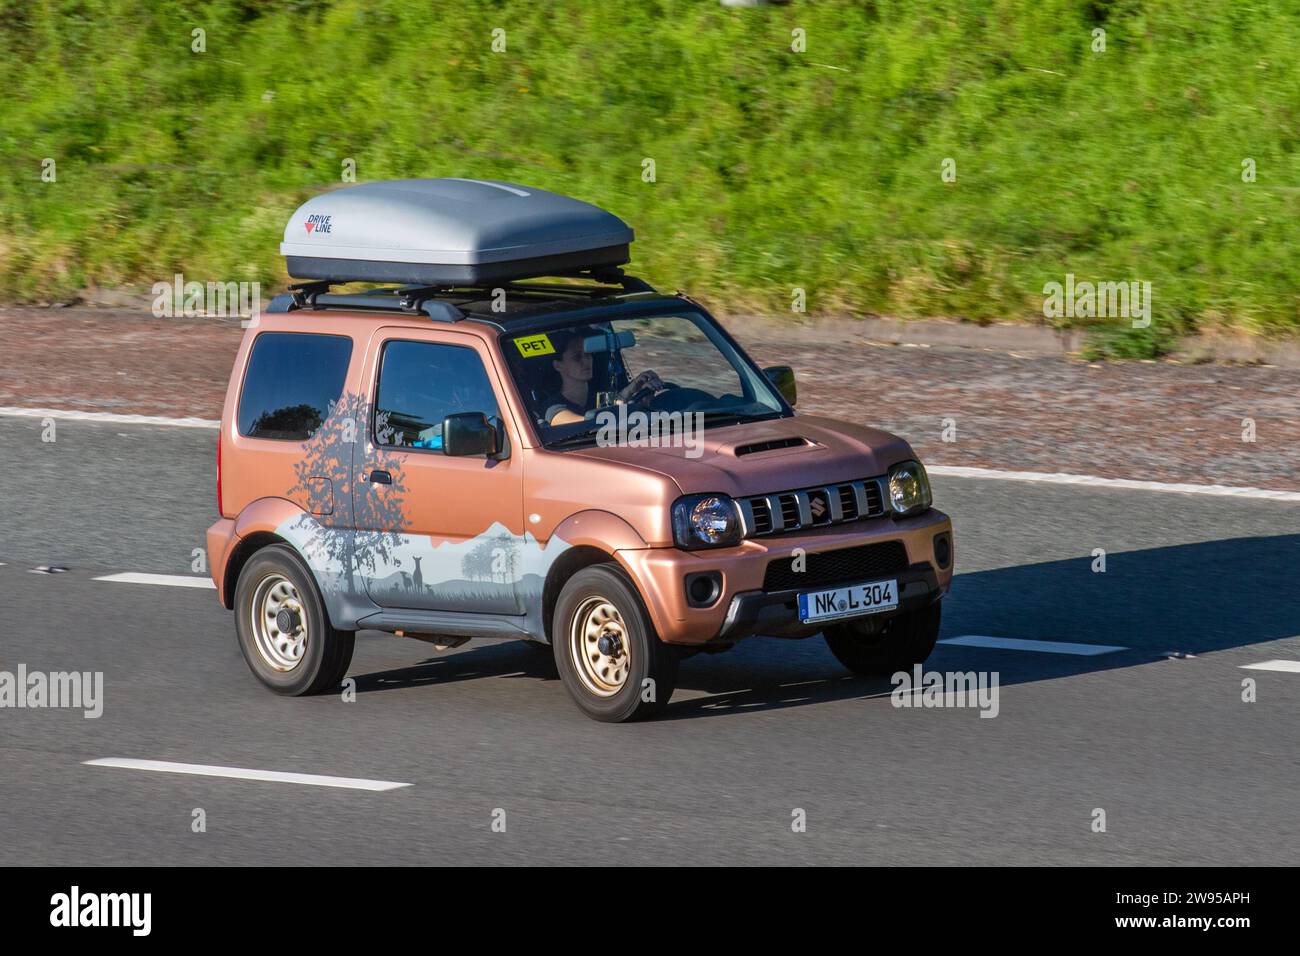 2017 bespoke German Suzuki Jimny  European country of origin number plate.  LHD SUV with roof rails and DriveLine roof box decorated with mountain decals, stickers and tree forest graphics. Suzuki Jimny SZ4 Auto Sport utility vehicle driving on the M6 motorway near Preston in Lancashire, UK Stock Photo